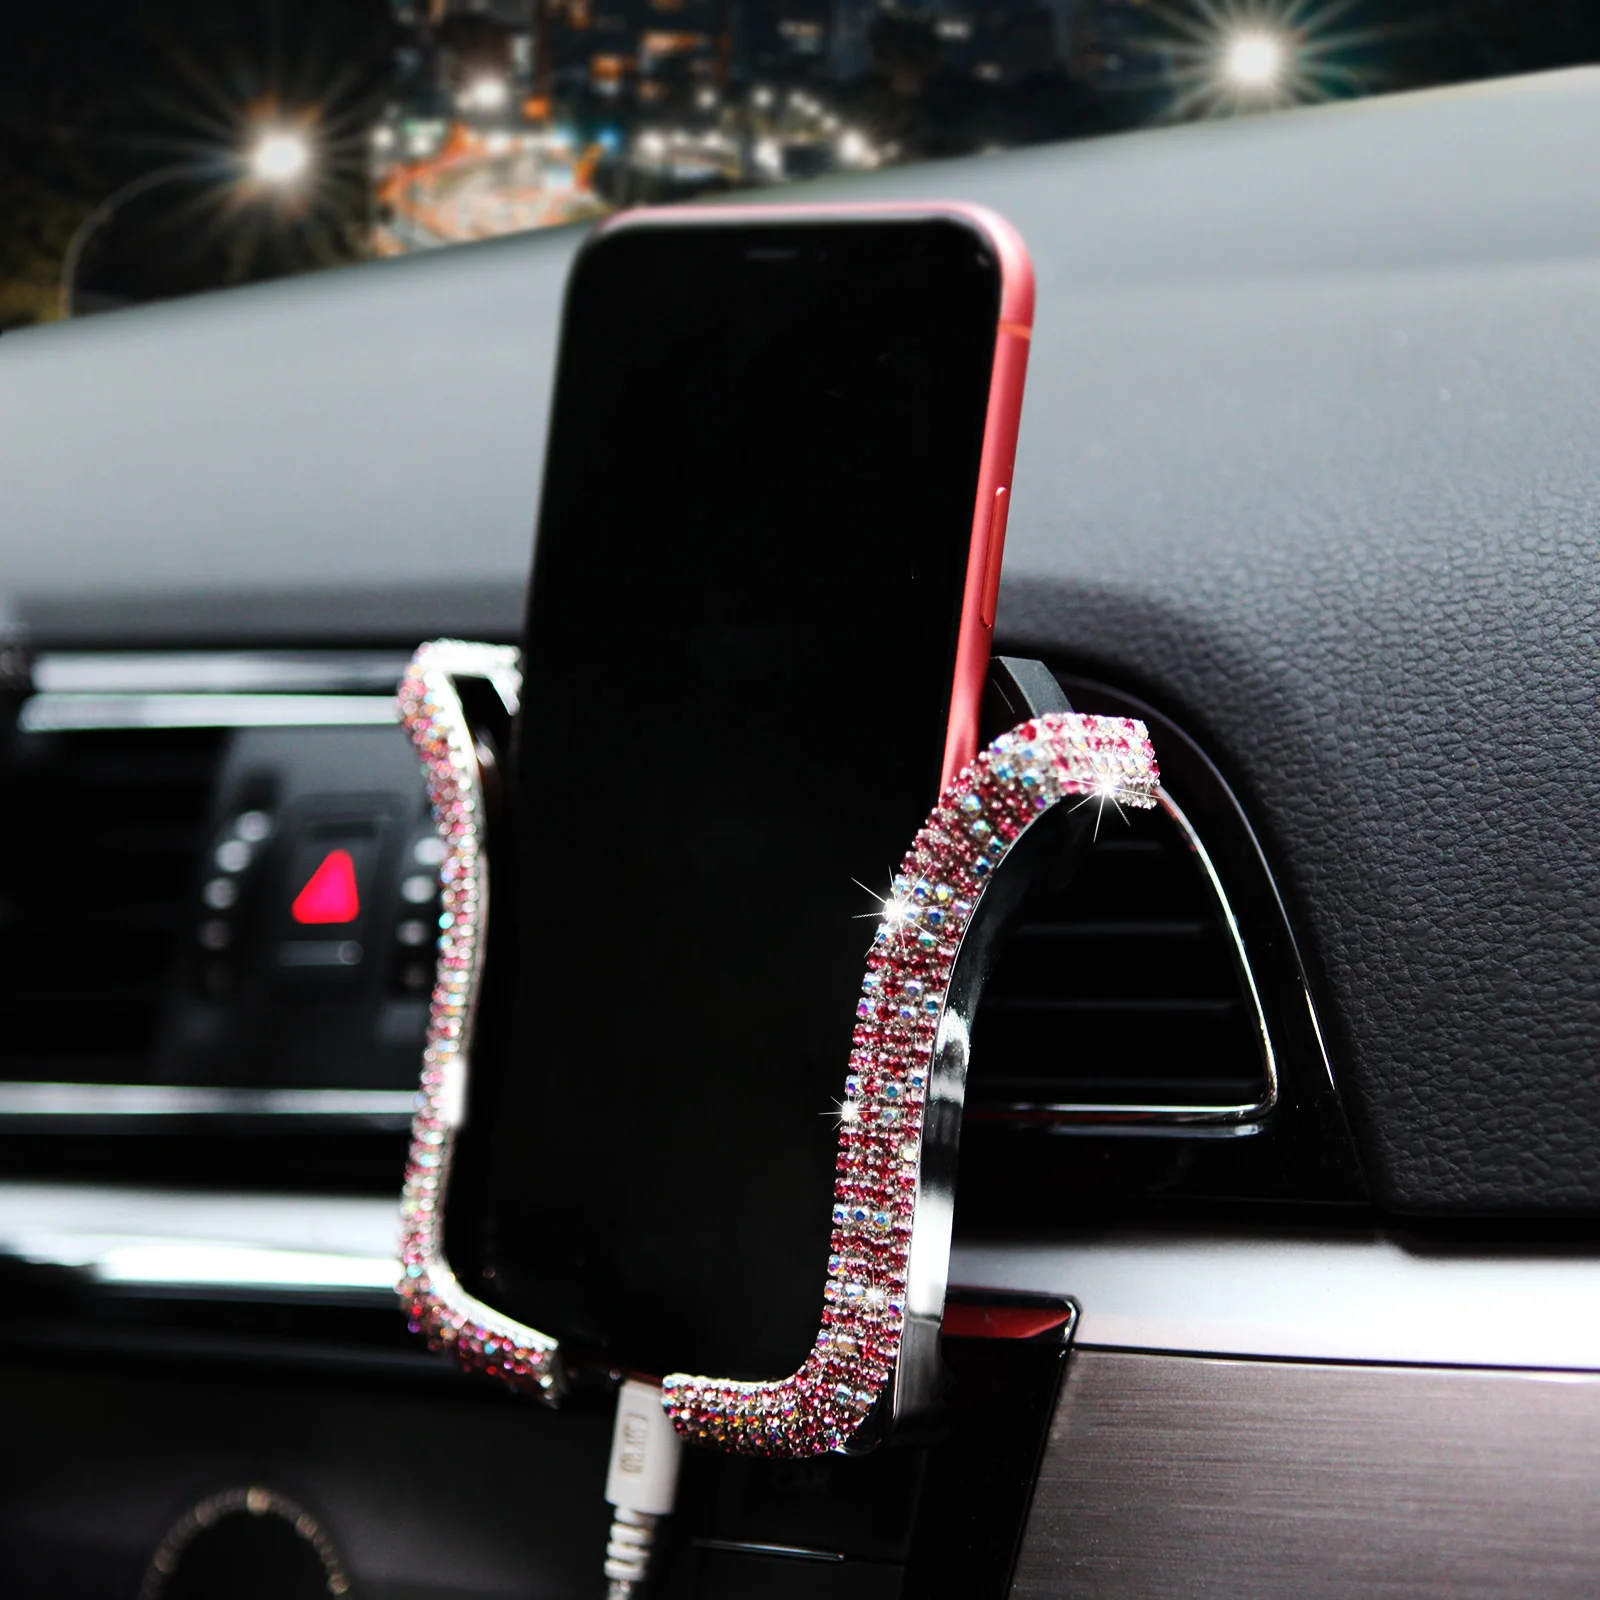 

Universal Car Phone Holder Bling Crystal Rhinestone Auto Air Vent Mount Clip Cellphone Stand Support for iPhone Samsung Xiaomi